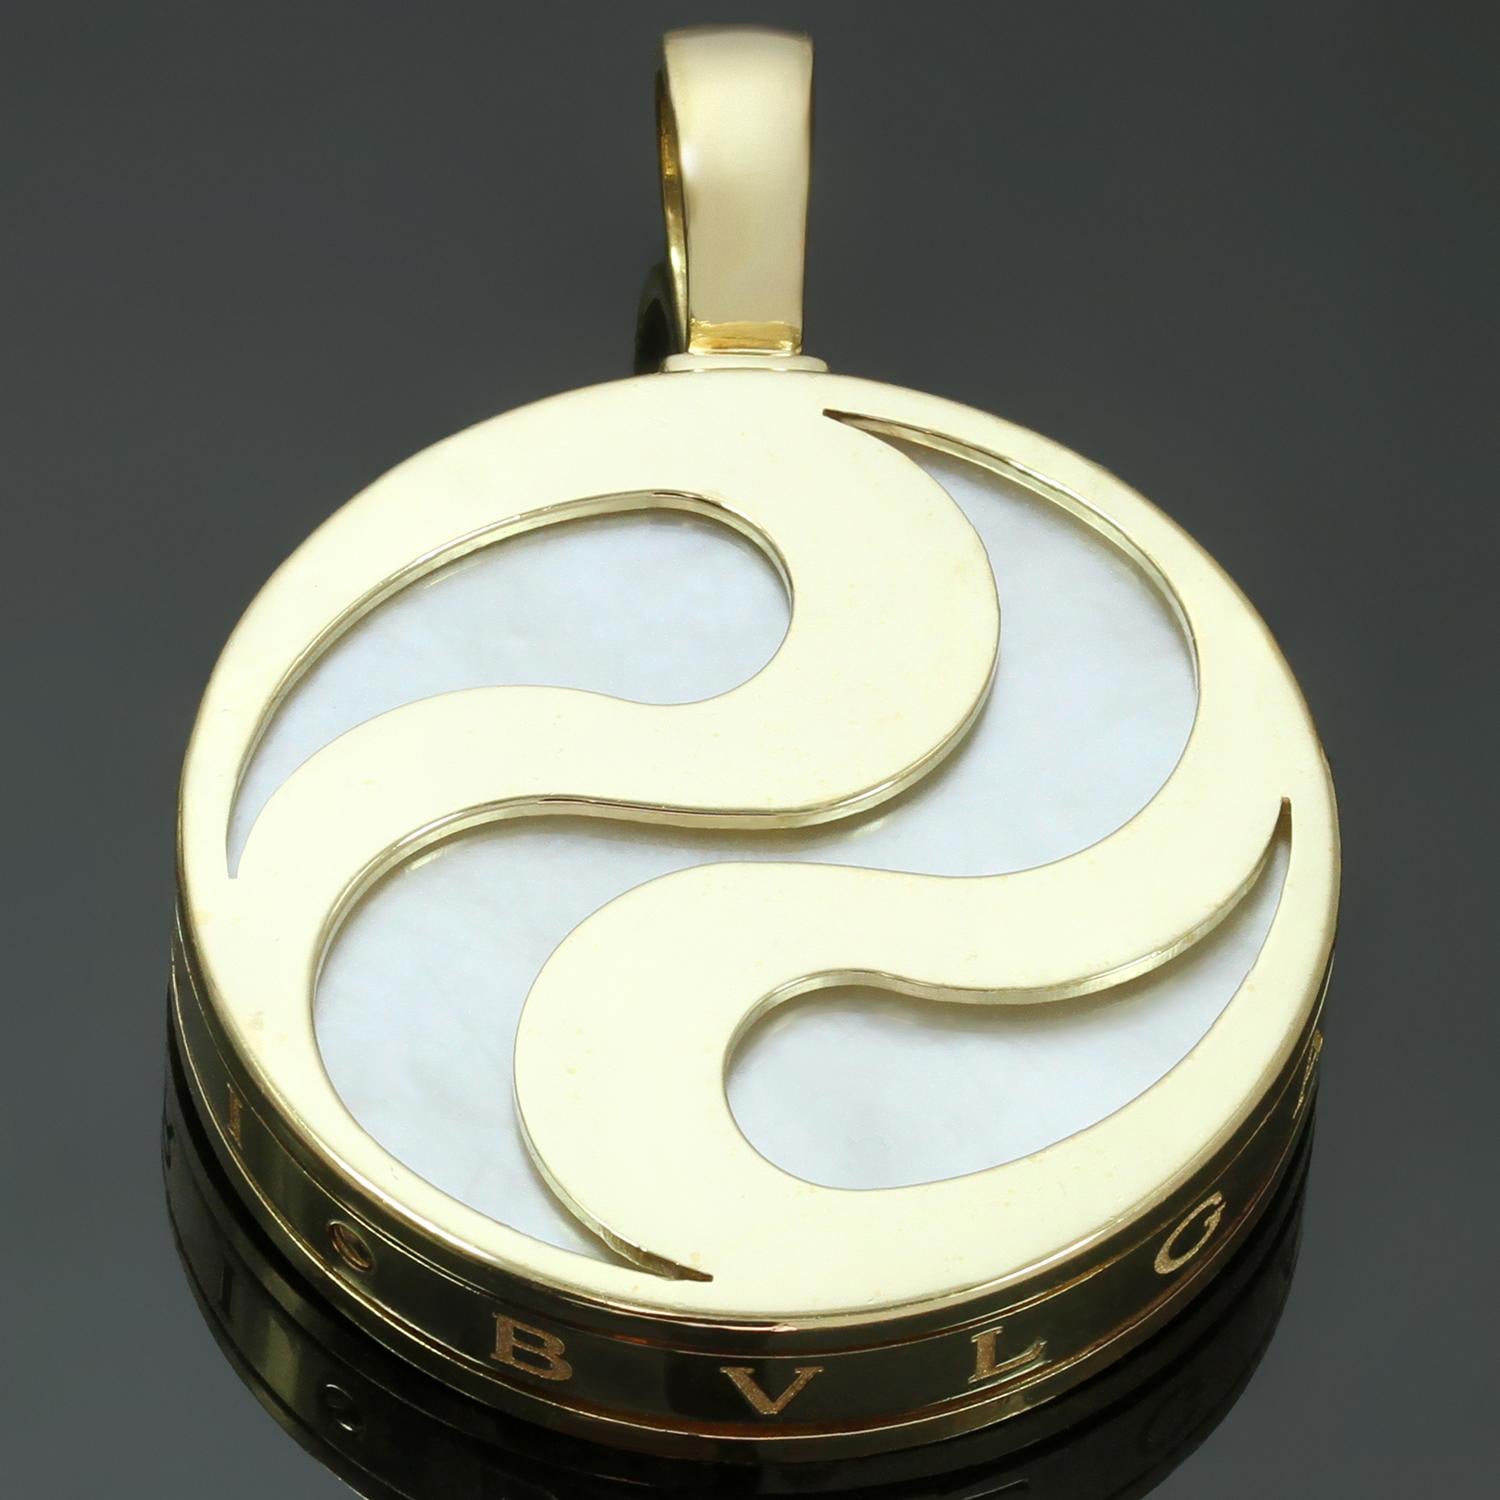 This chic and playful Bulgari spinning pendant features a swirling ying yang design crafted in 18k yellow gold and inlaid with mother-of-pearl. The pendant is inscribed with the Bvlgari logo. Made in Italy circa 1990s. Measurements: 1.06